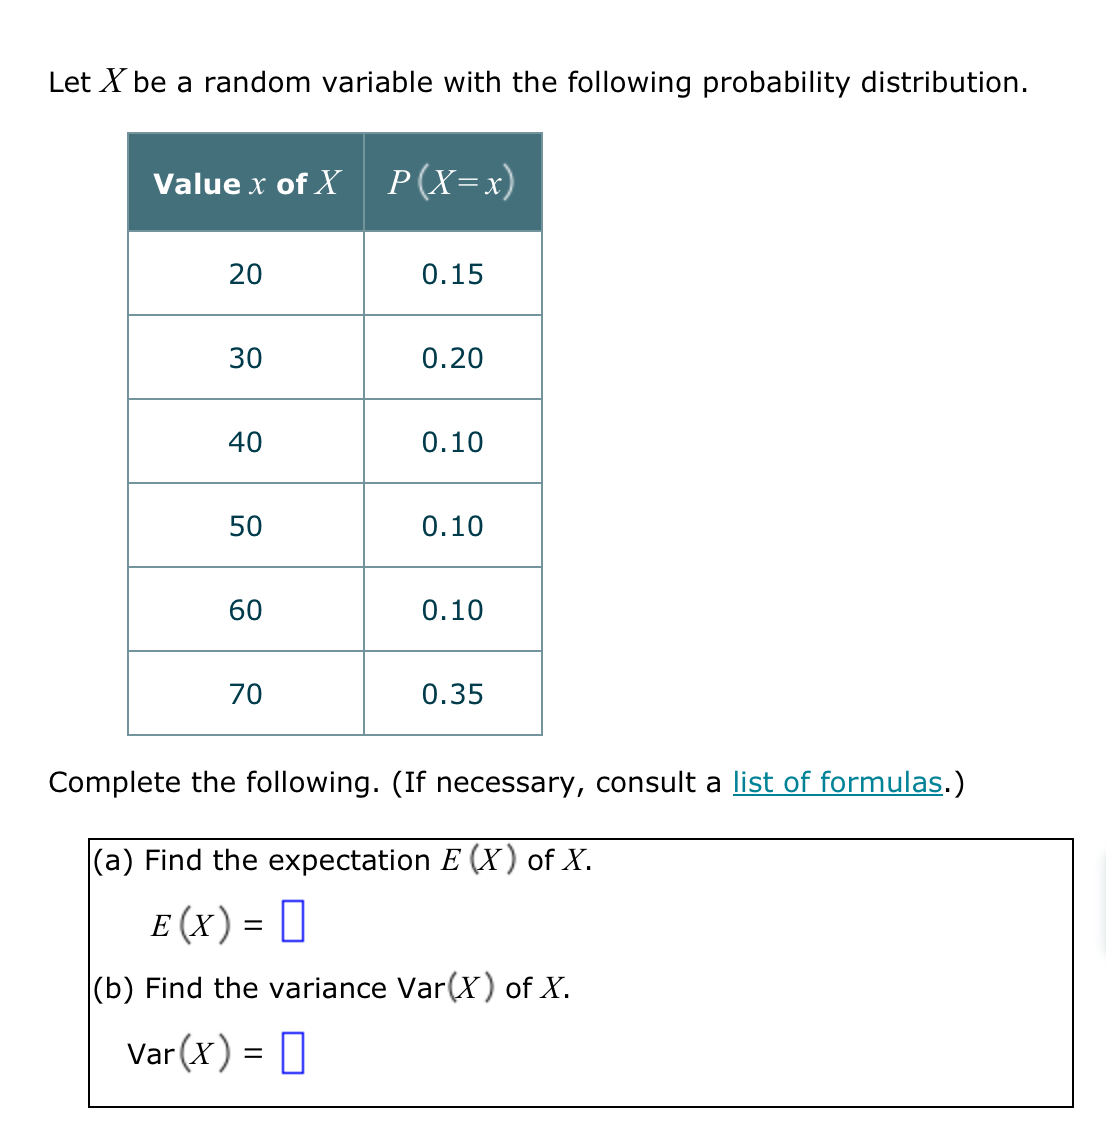 Let X be a random variable with the following probability distribution.
Value x of X P(X=x)
20
30
40
50
60
70
0.15
0.20
0.10
0.10
0.10
0.35
Complete the following. (If necessary, consult a list of formulas.)
(a) Find the expectation E (X) of X.
E (X) =
(b) Find the variance Var(X) of X.
Var(x) =